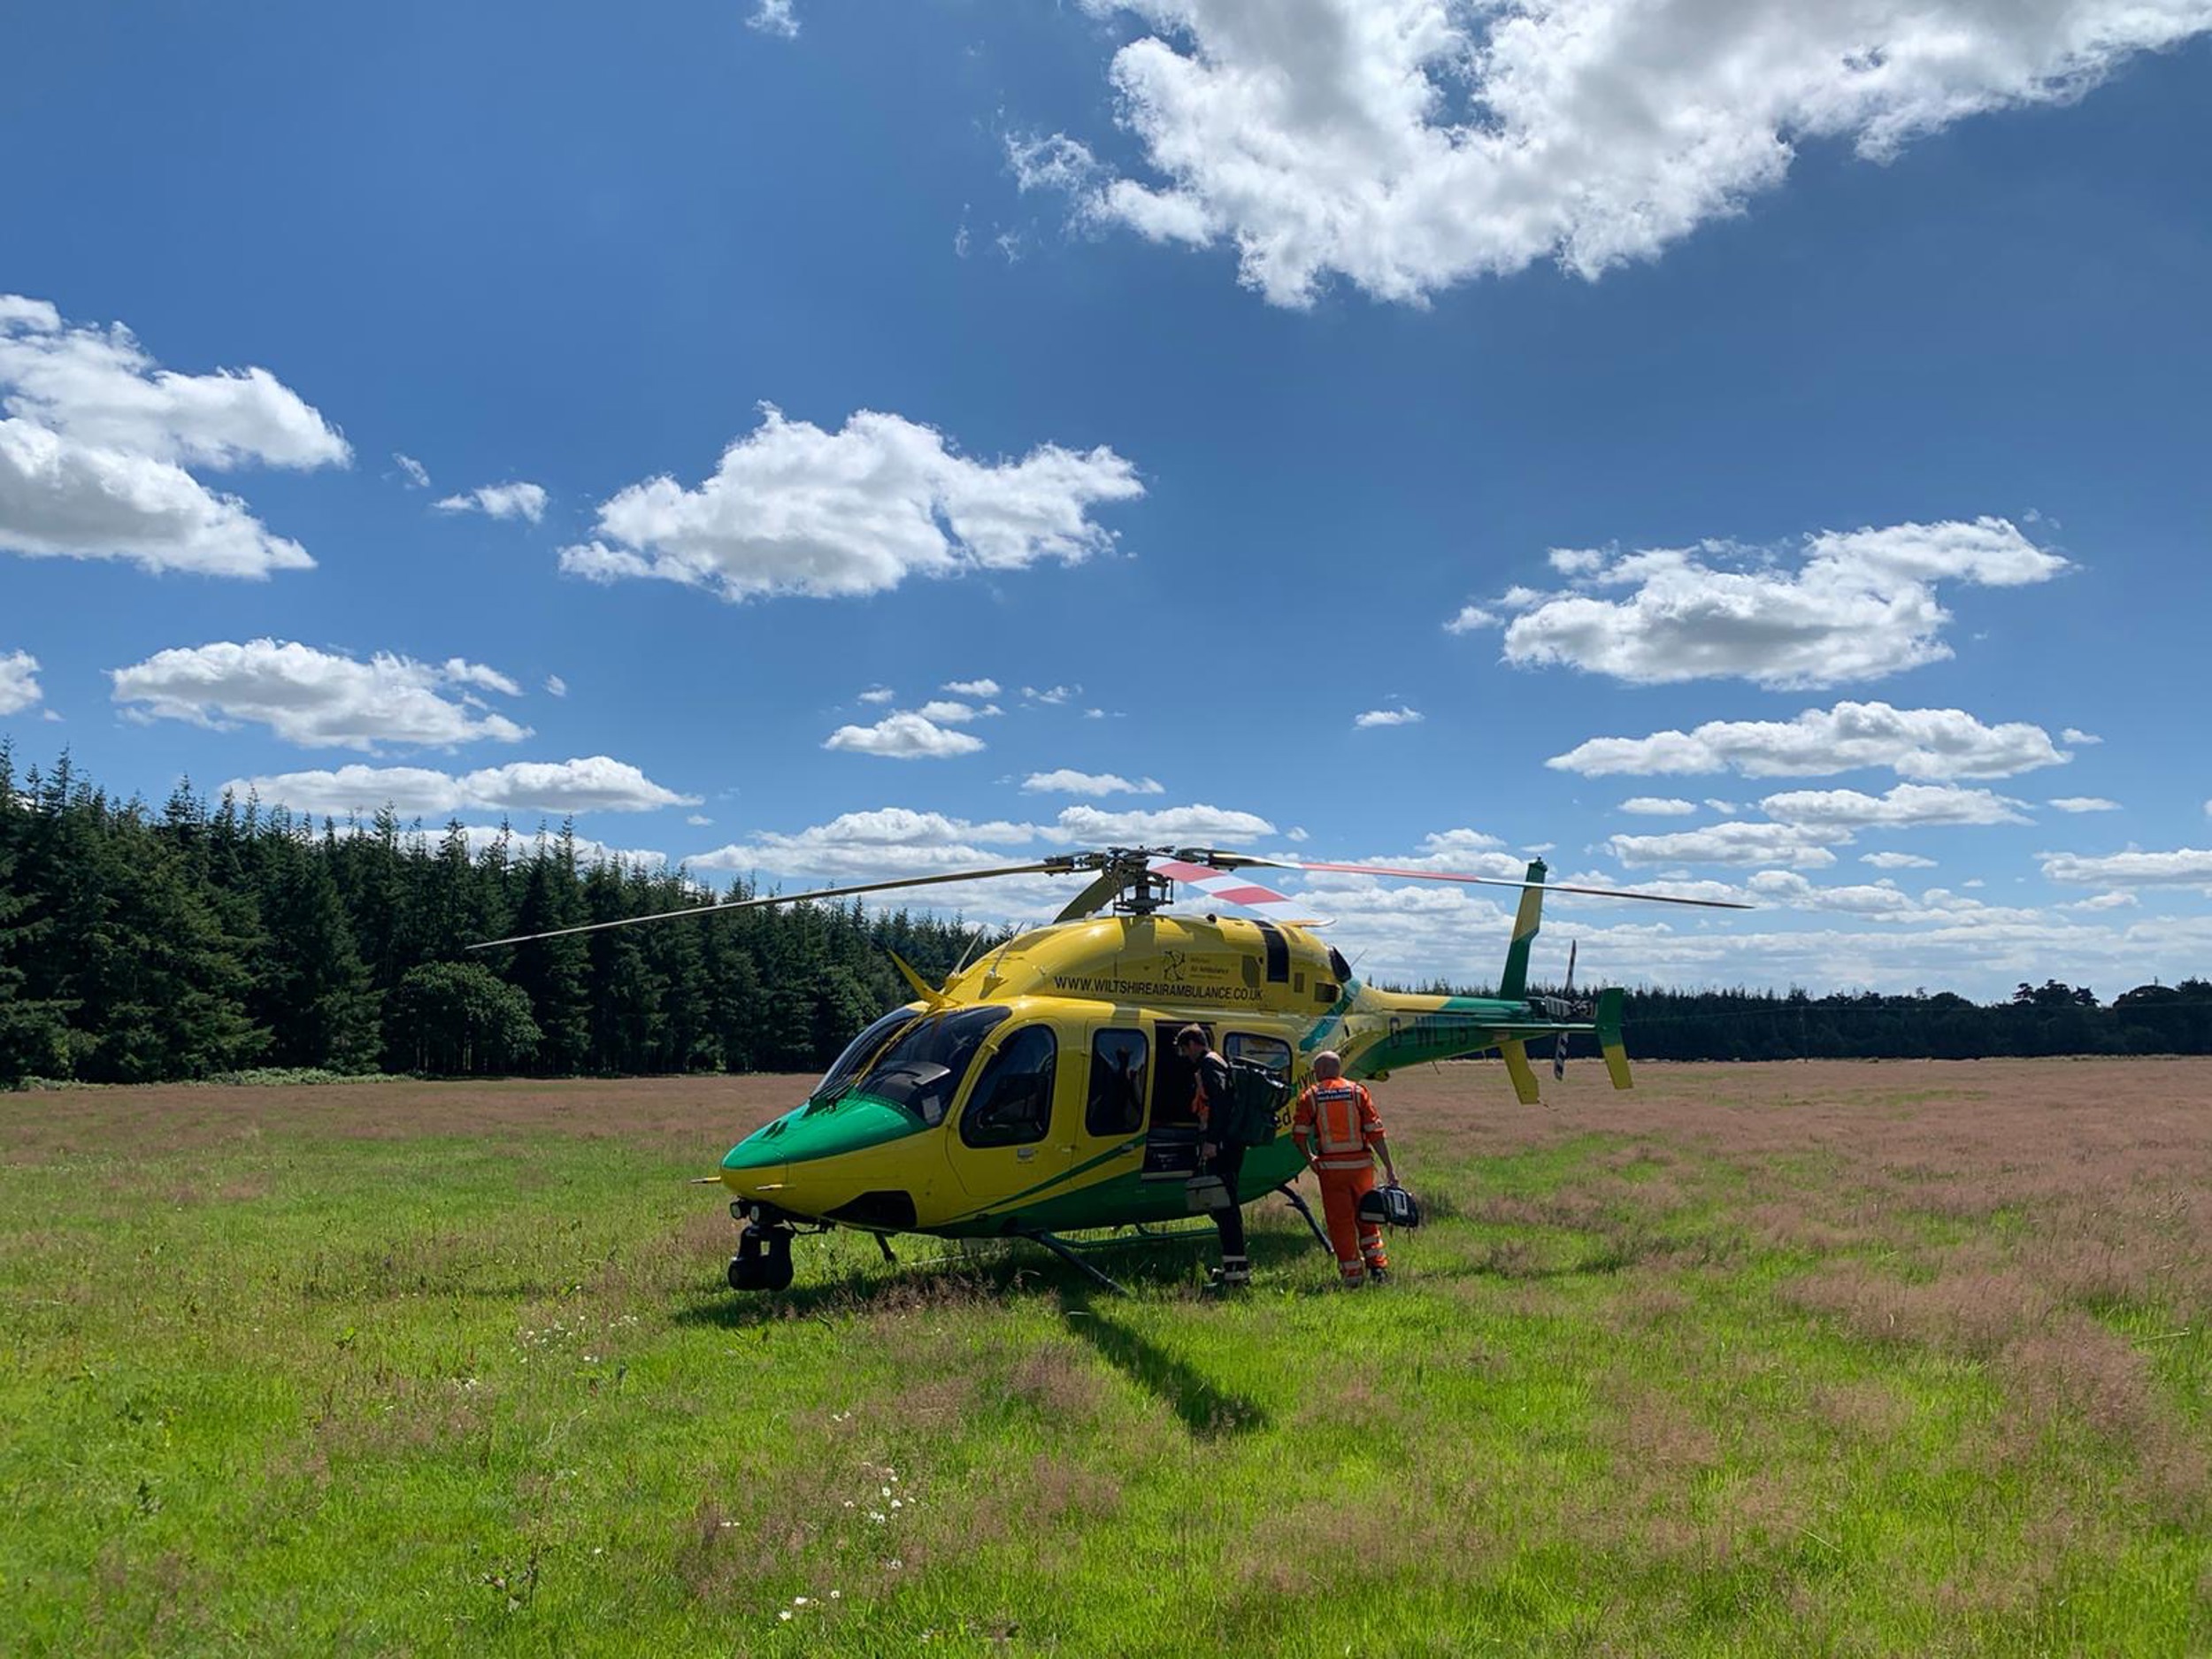 A photo of a yellow and green helicopter landed in a field with blue sky